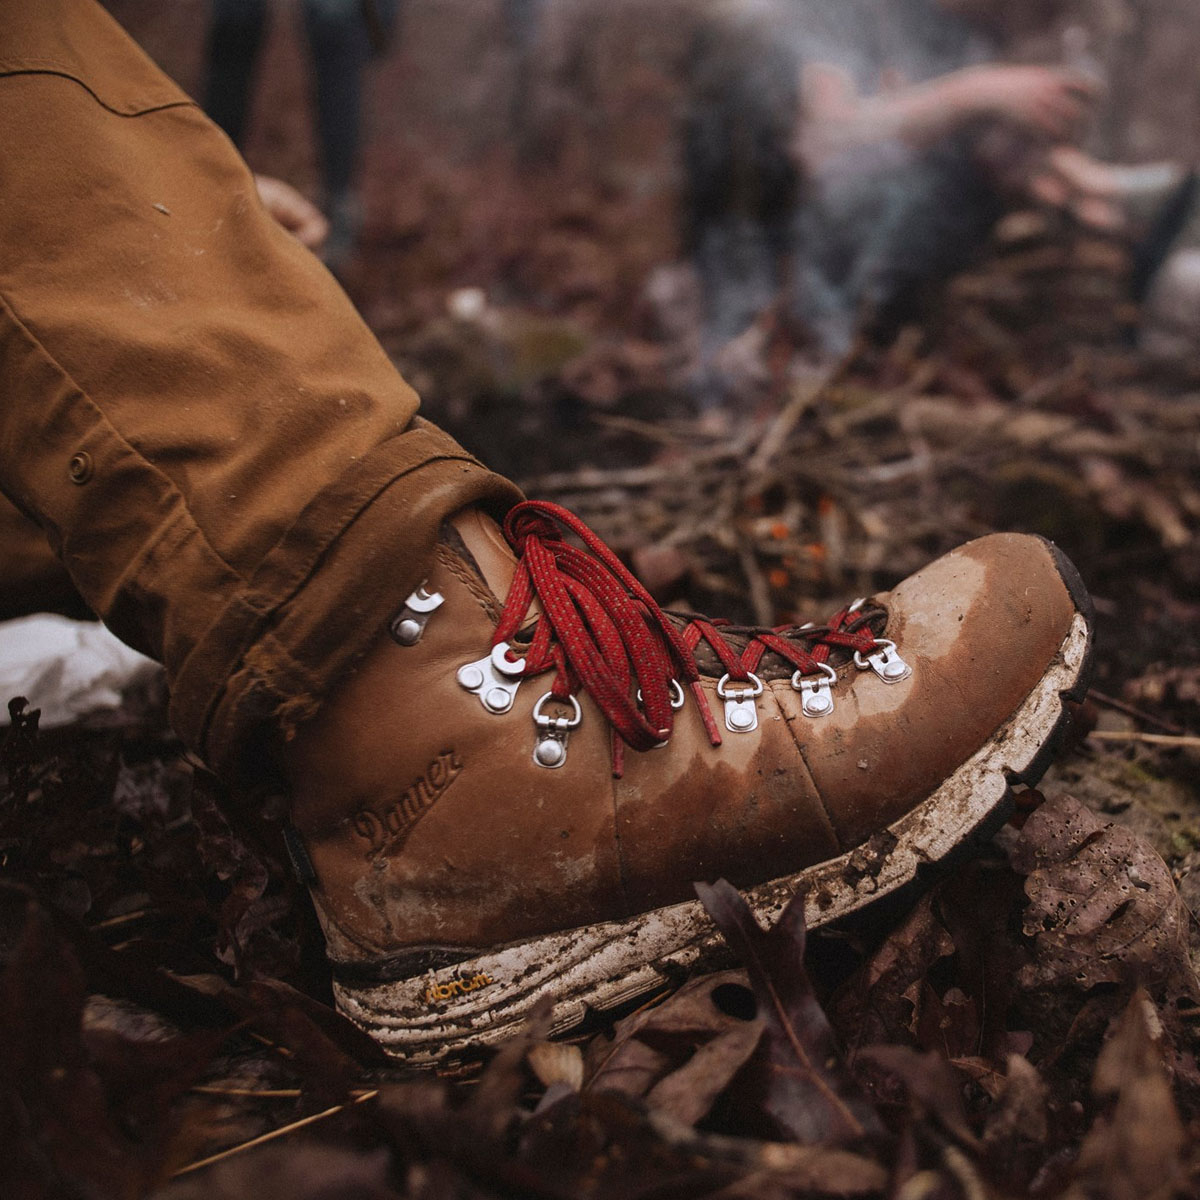 Danner Mountain 600 Boot Saddle Tan, with Danner’s breathable Danner® Dry waterproofing